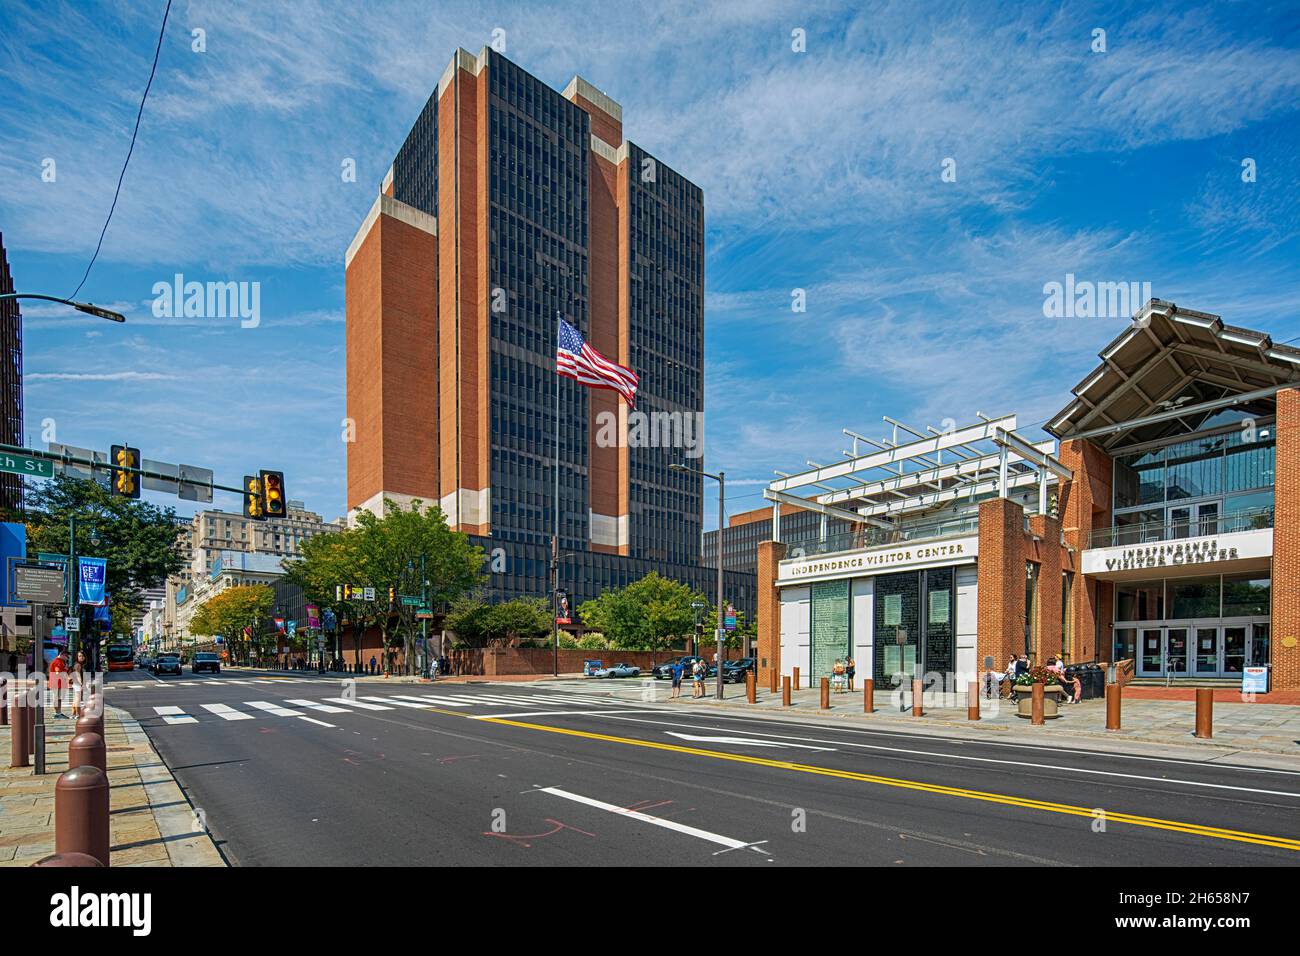 601 Market Street, United States Court of Appeals for the Third Circuit, overlooks Philadelphia's Independence Mall. Stock Photo